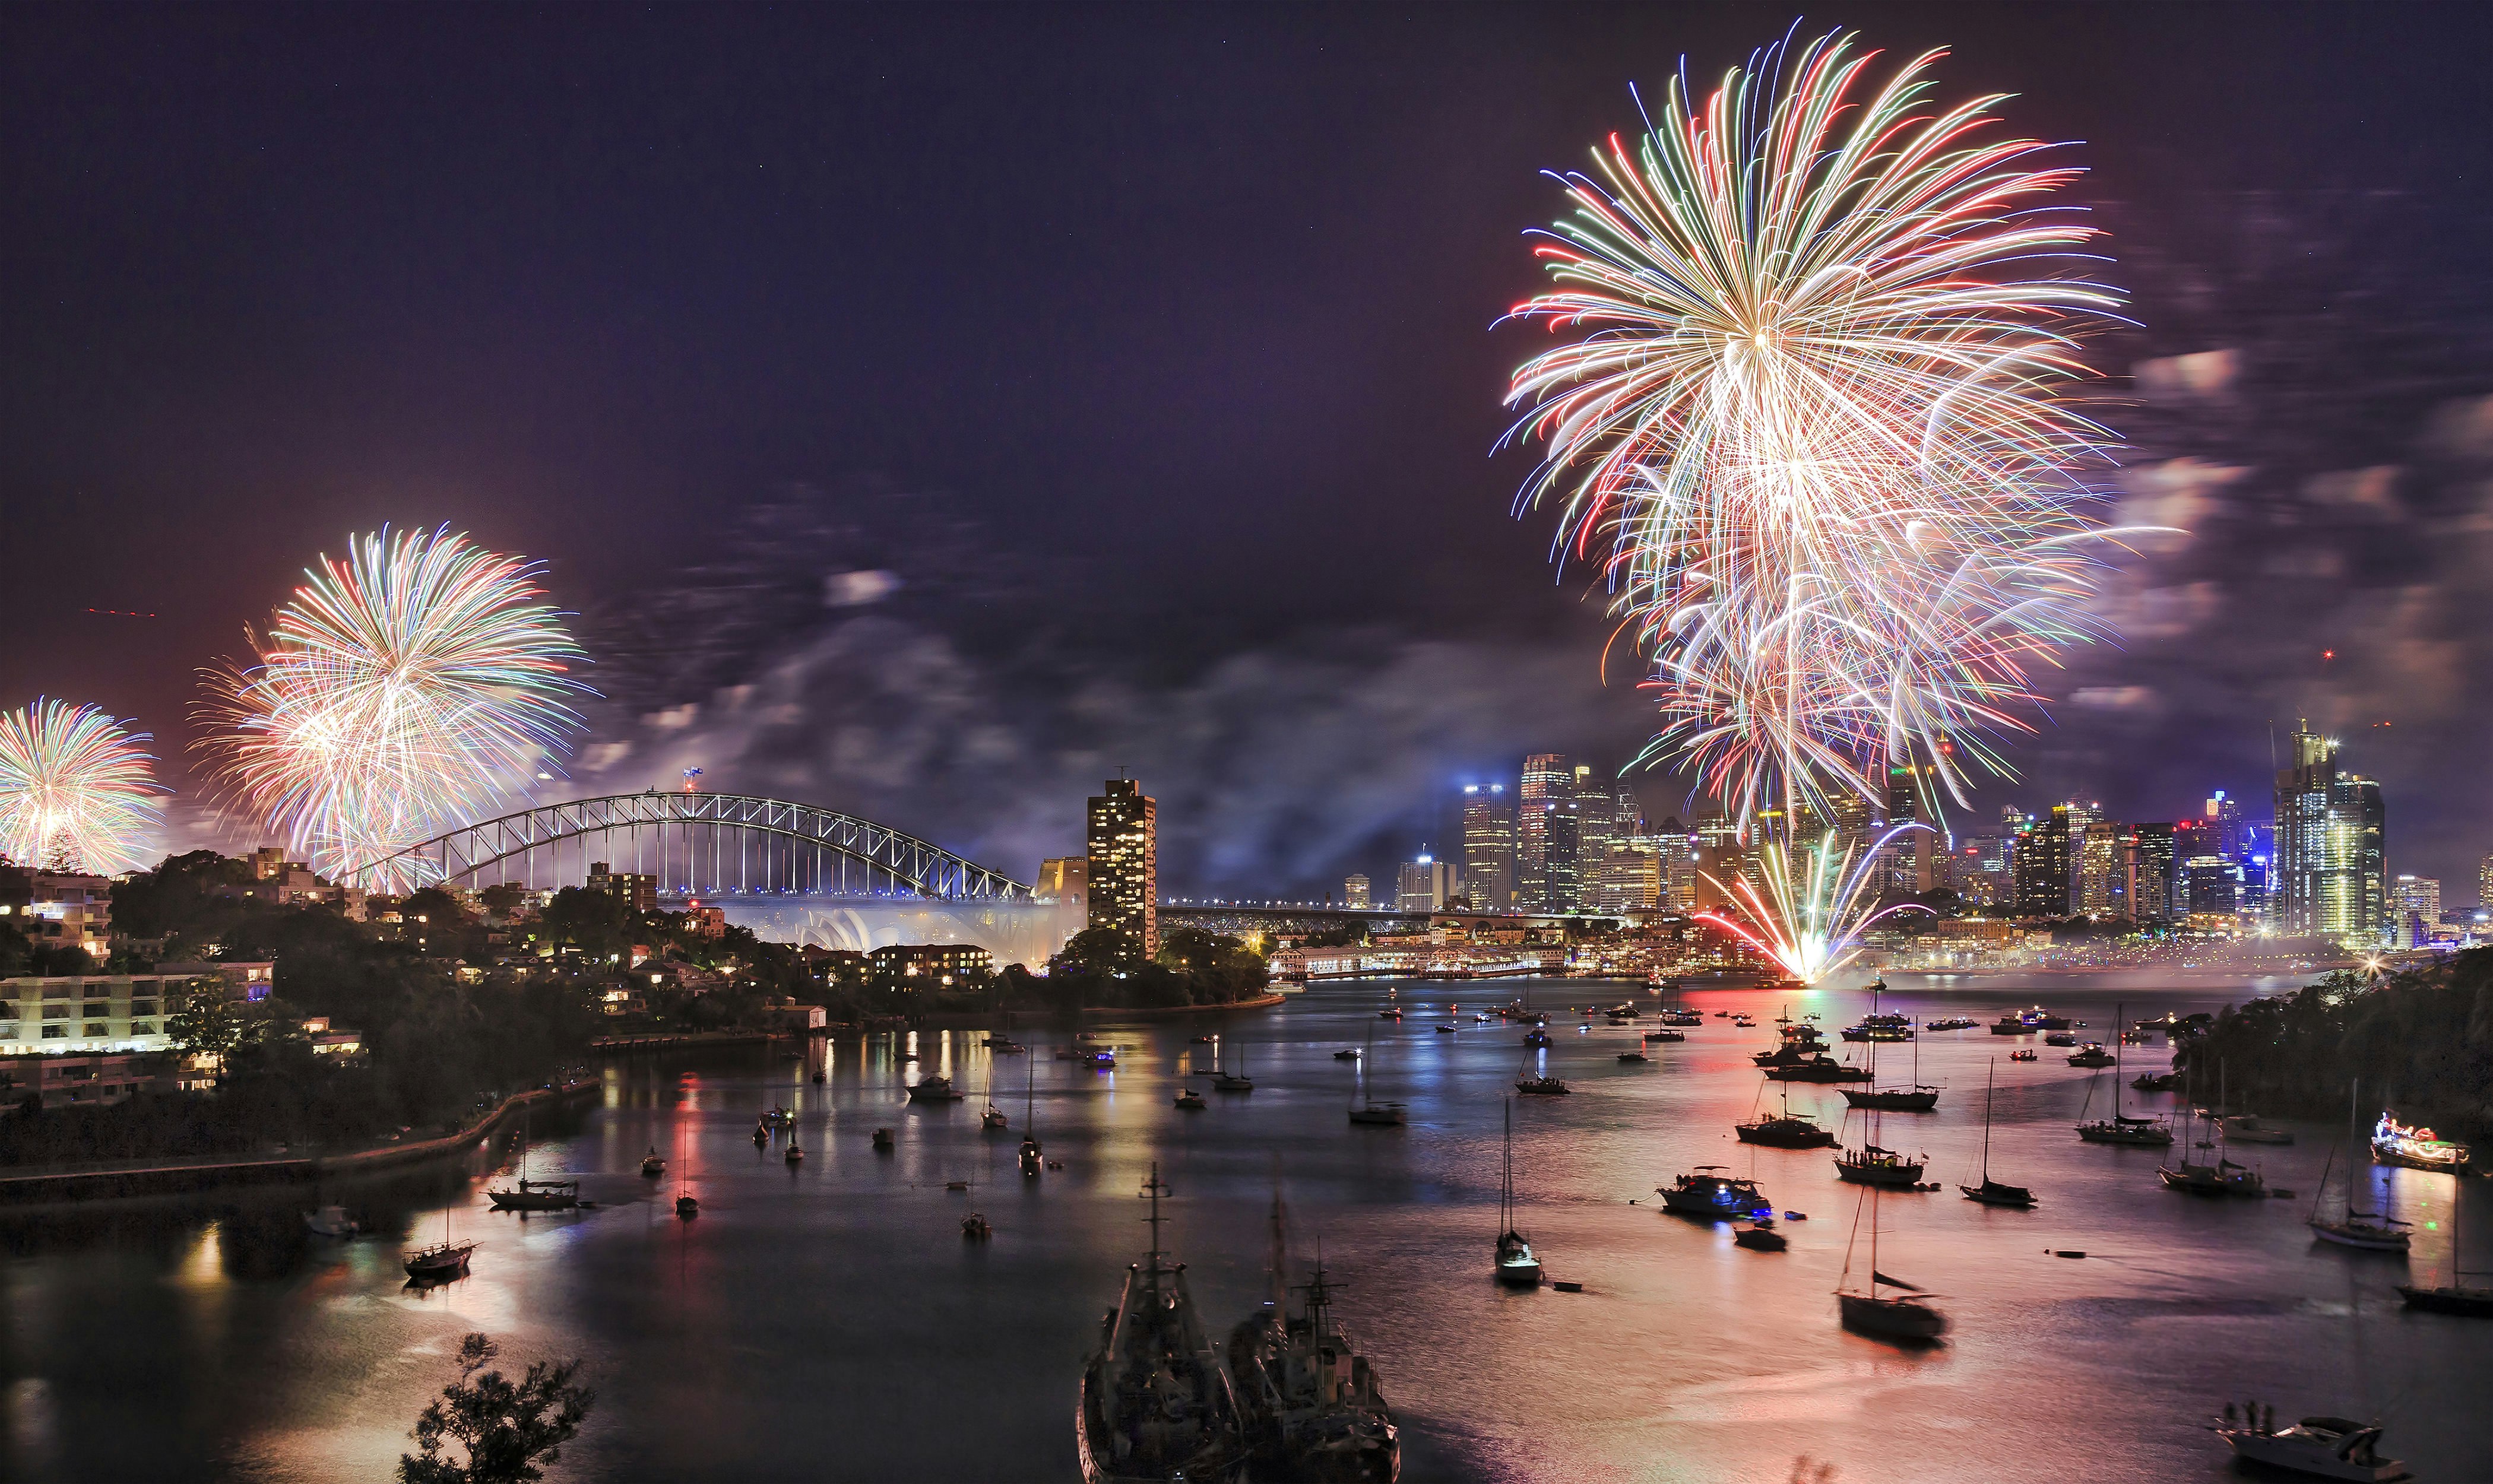 New Year's Eve fireworks explode over Sydney Harbour at night. The harbor is filled with boats, and the Sydney Harbour Bridge and buildings of the CBD can be seen beyond.